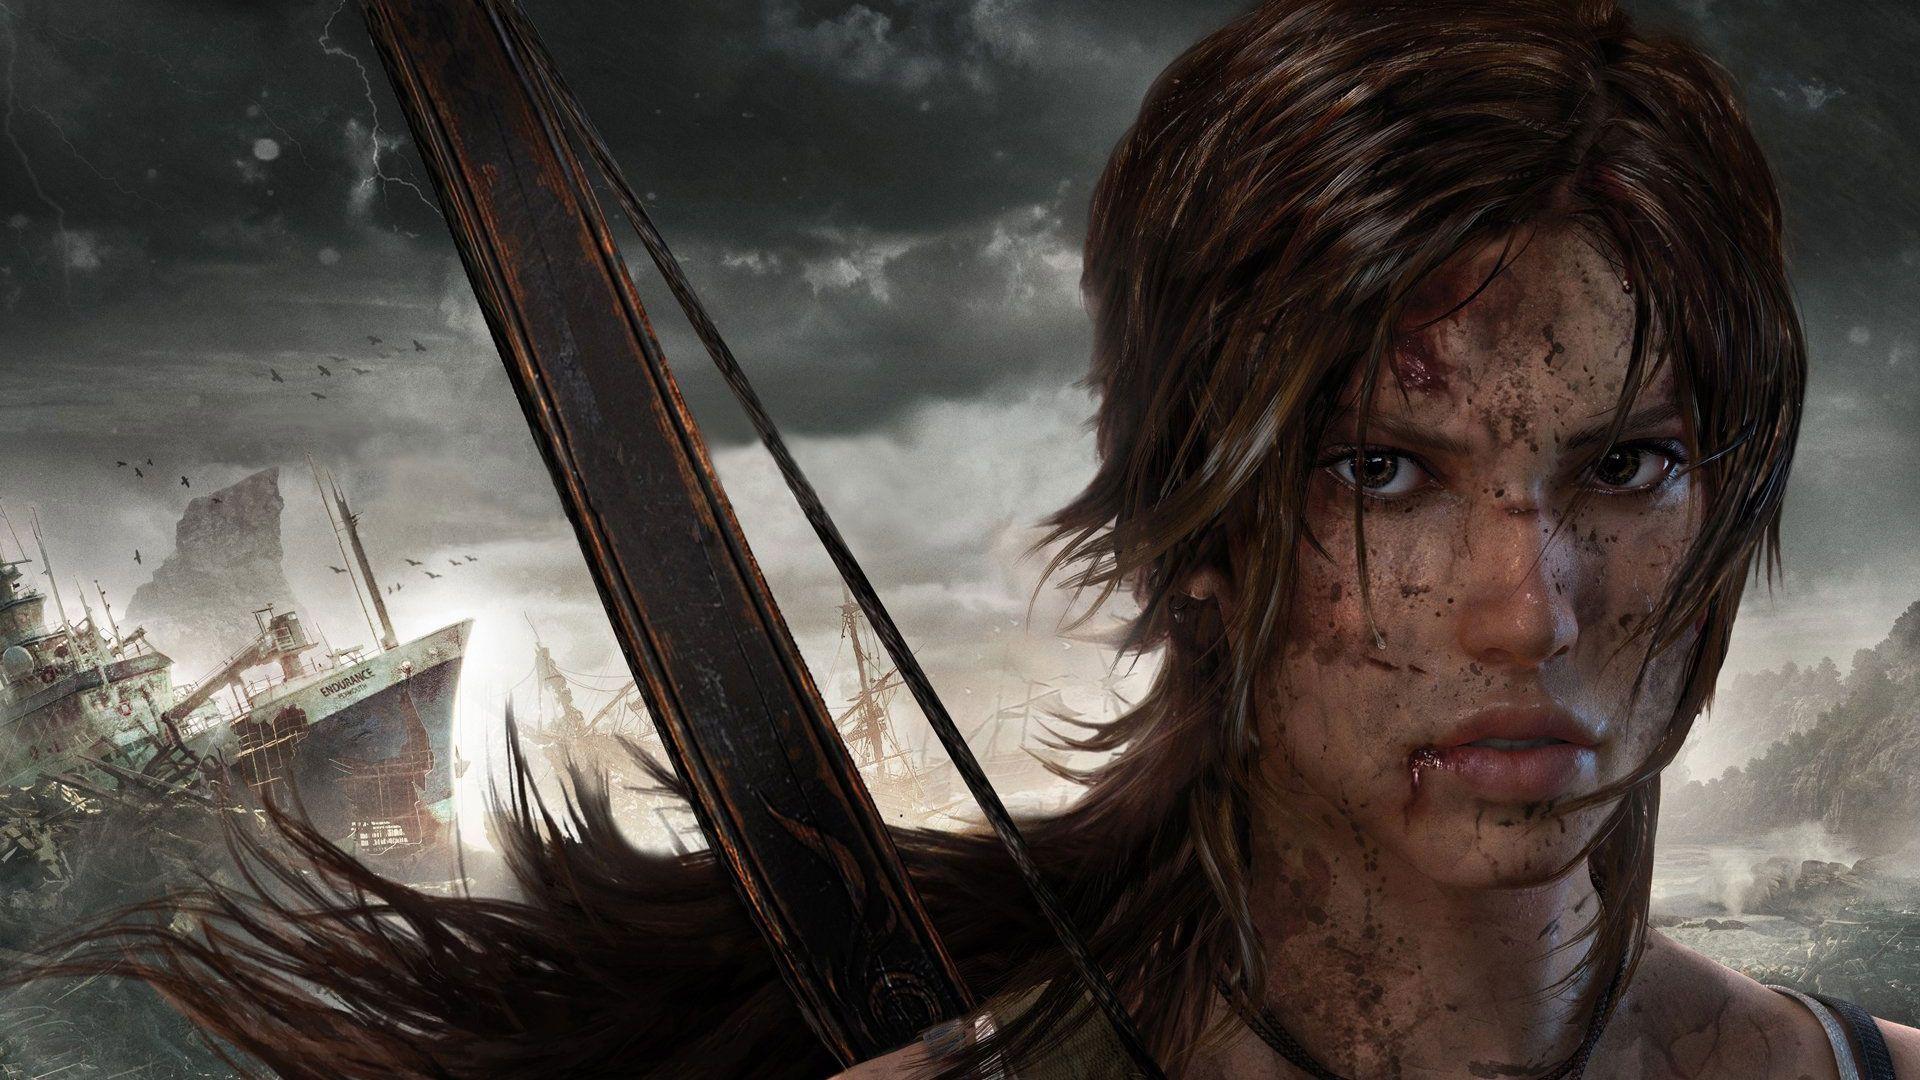 Tomb Raider Wallpapers in HD